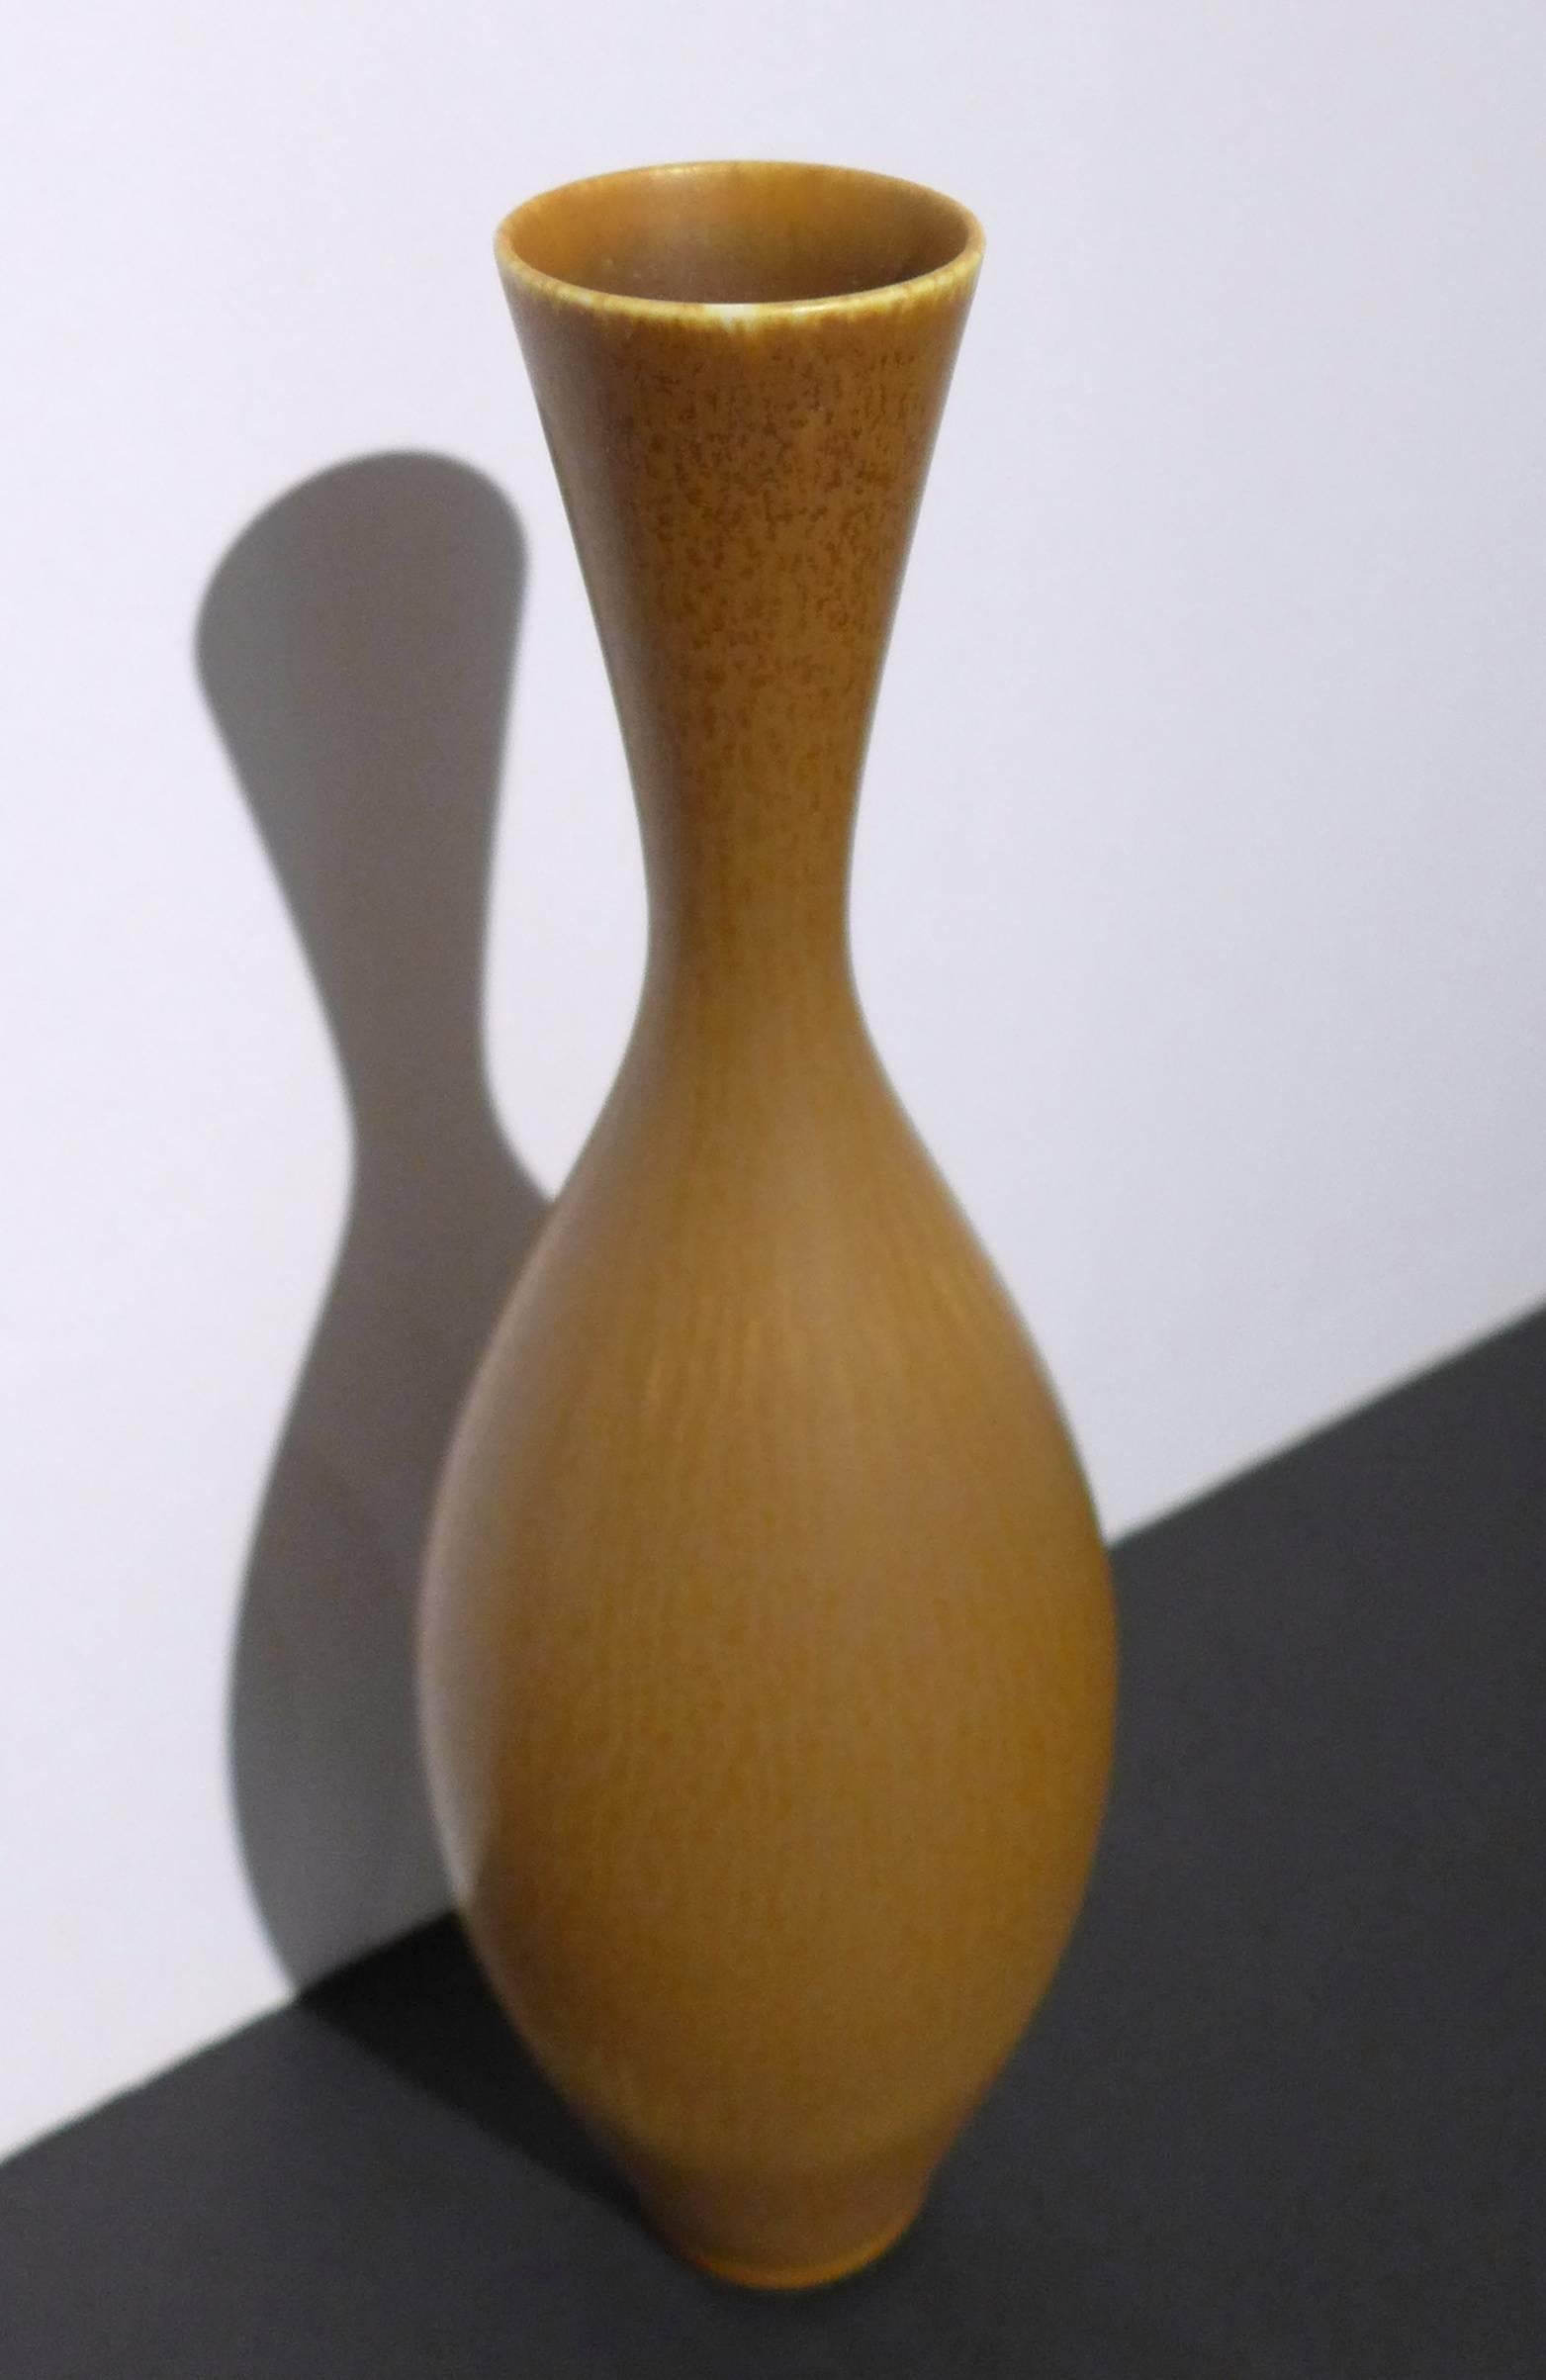 Studio stoneware vase with multi-chromatic matte hare's fur glaze in a brown/ochre color. By eminent Swedish ceramist Berndt Friberg, executed at Gustavsberg in 1958. Incised marks.